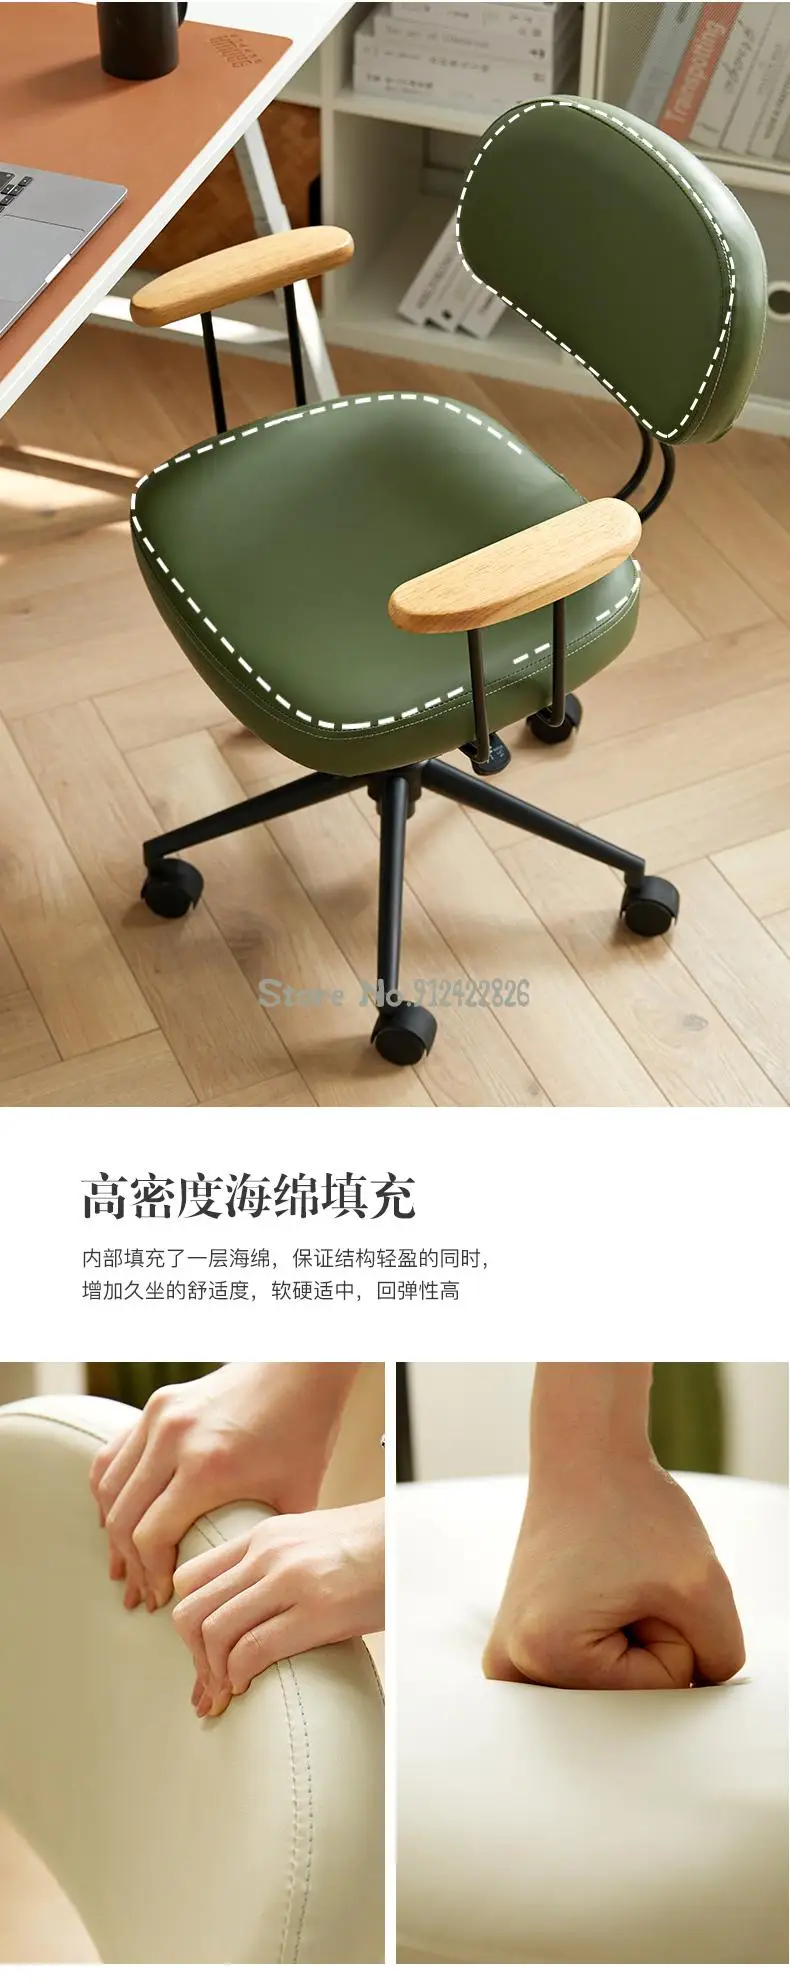 Computer chair home backrest office chair study desk seat comfortable study swivel chair sedentary ergonomic chair Office Furniture near me